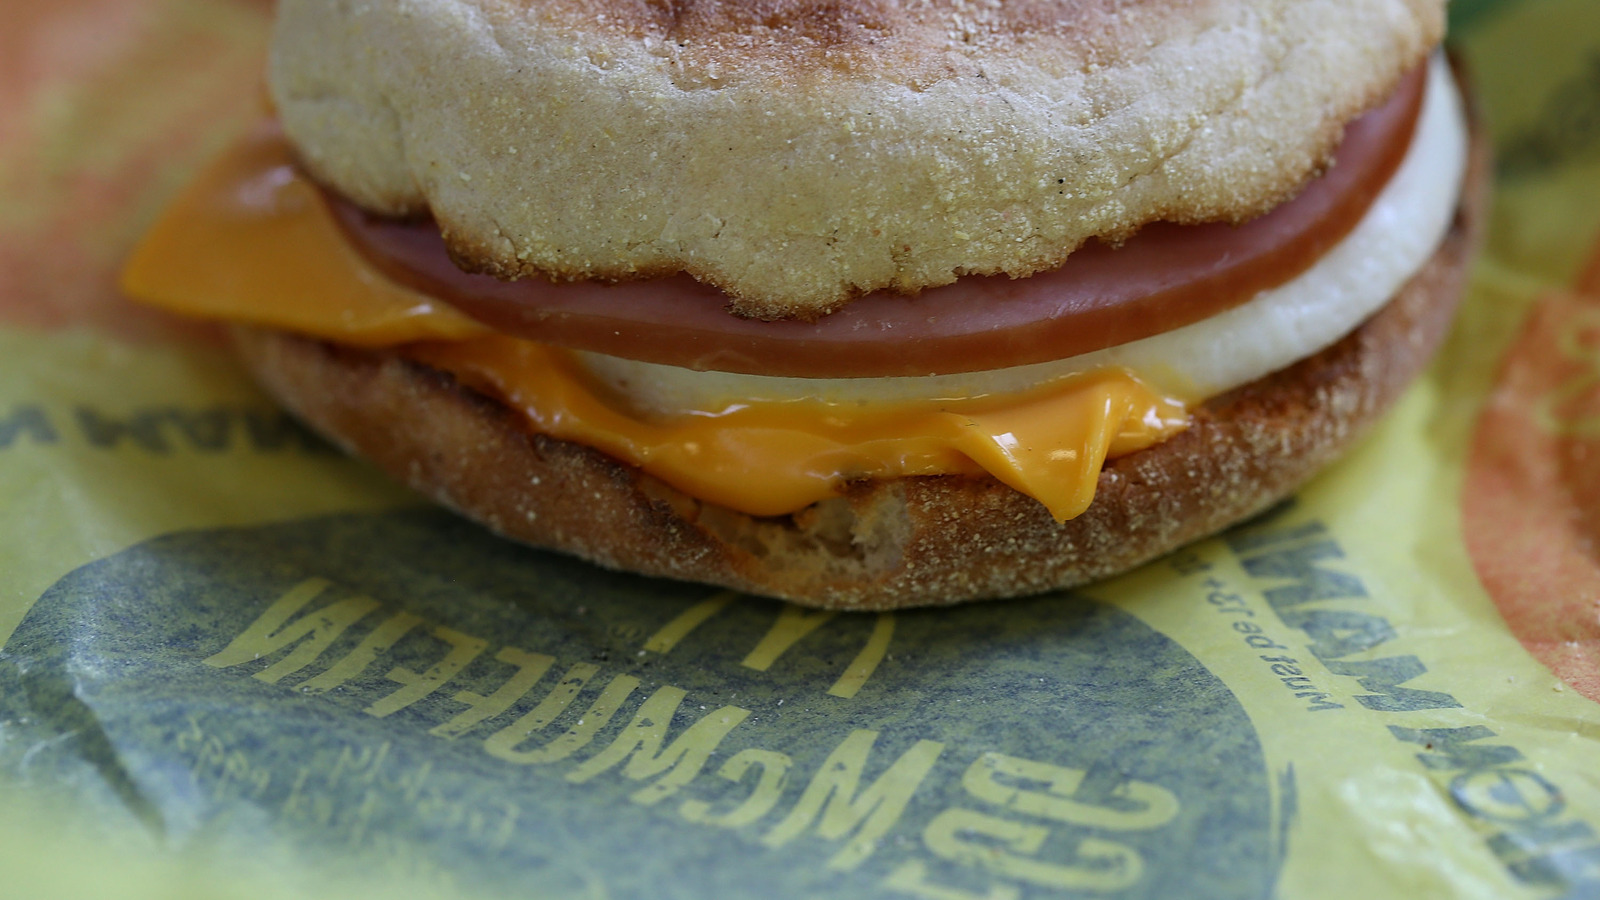 Are Real Eggs Used For McDonald's Breakfast Menu?